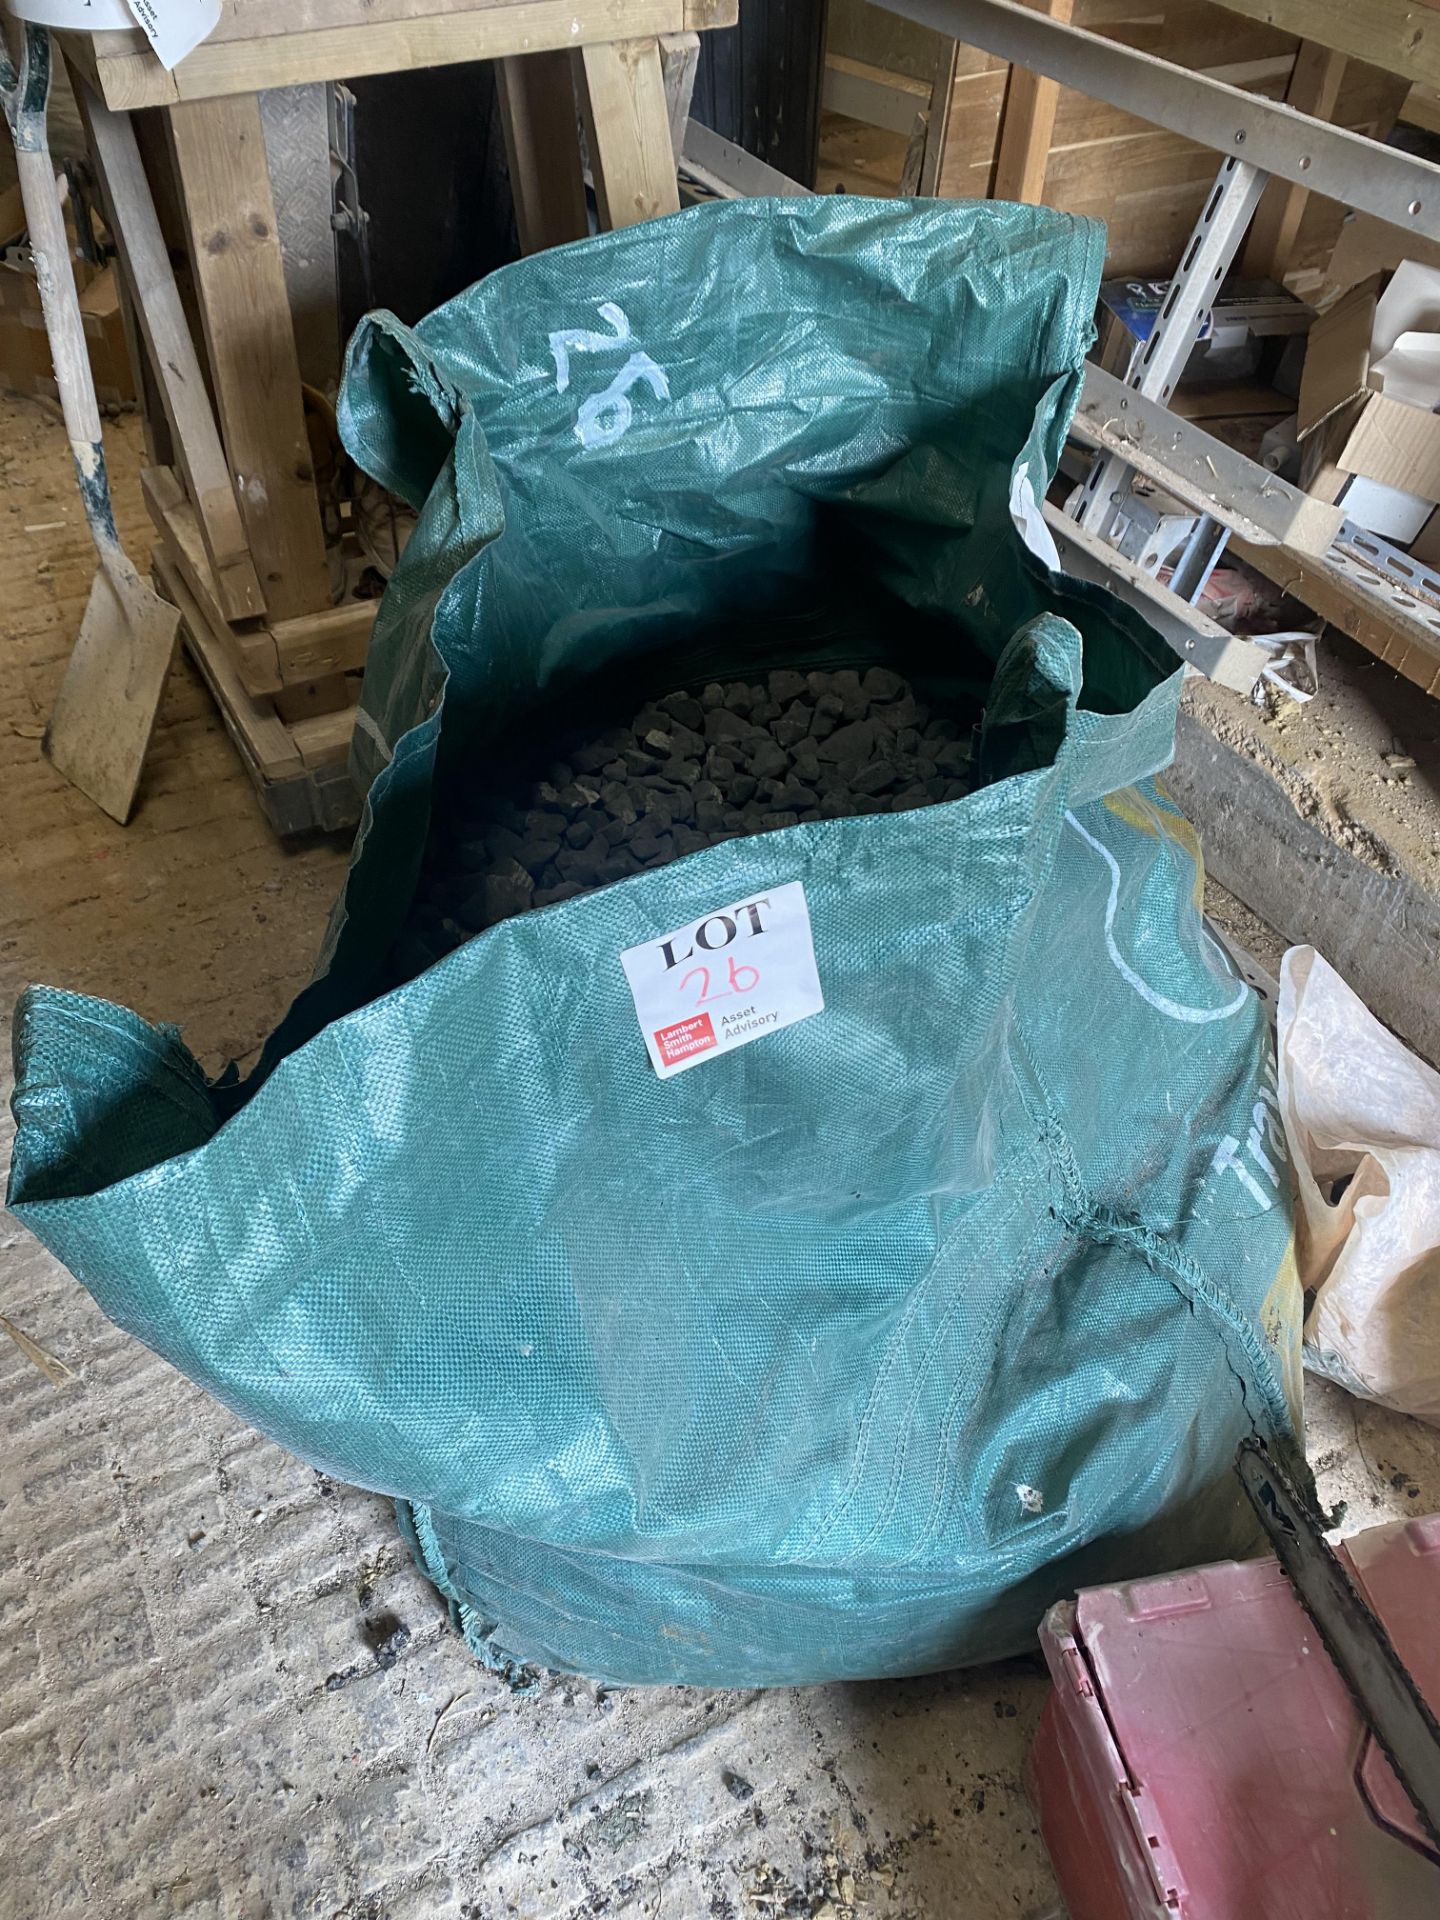 Dumpy bag of coke/ charcoal cinder blocks/ chipping Located at Unit 54, Newcourt Barton, Clyst Road,